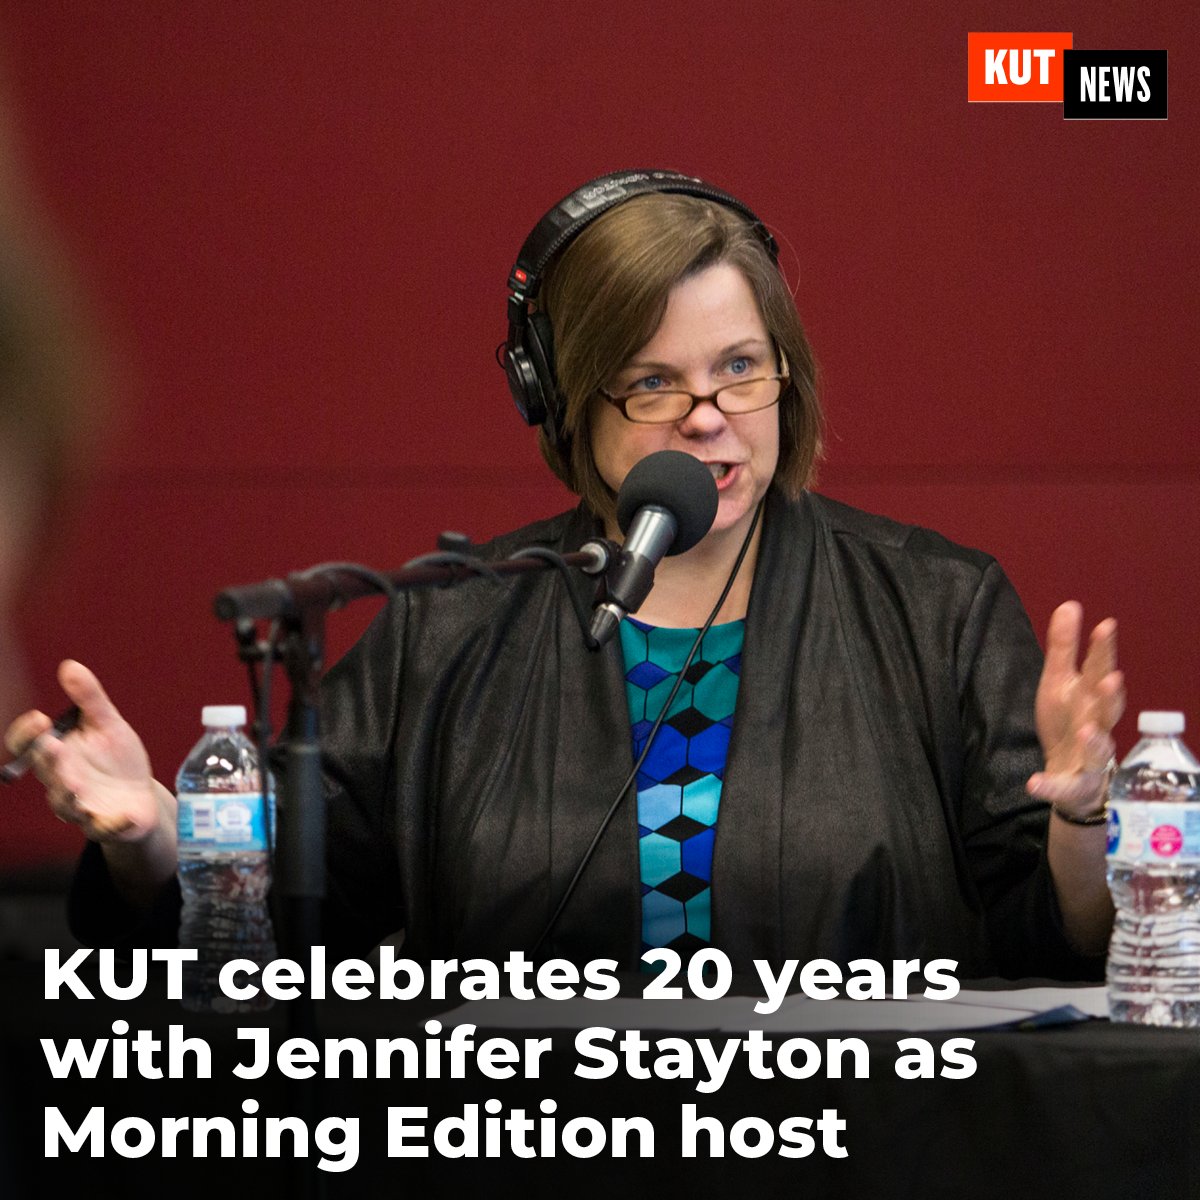 Congratulations to Jennifer Stayton, who marks 20 years of hosting Morning Edition today! It’s one of the toughest jobs — with the toughest shift — in the business. She has helped build the KUT newsroom and elevate the journalism we do, becoming one of Austin’s best-known voices.